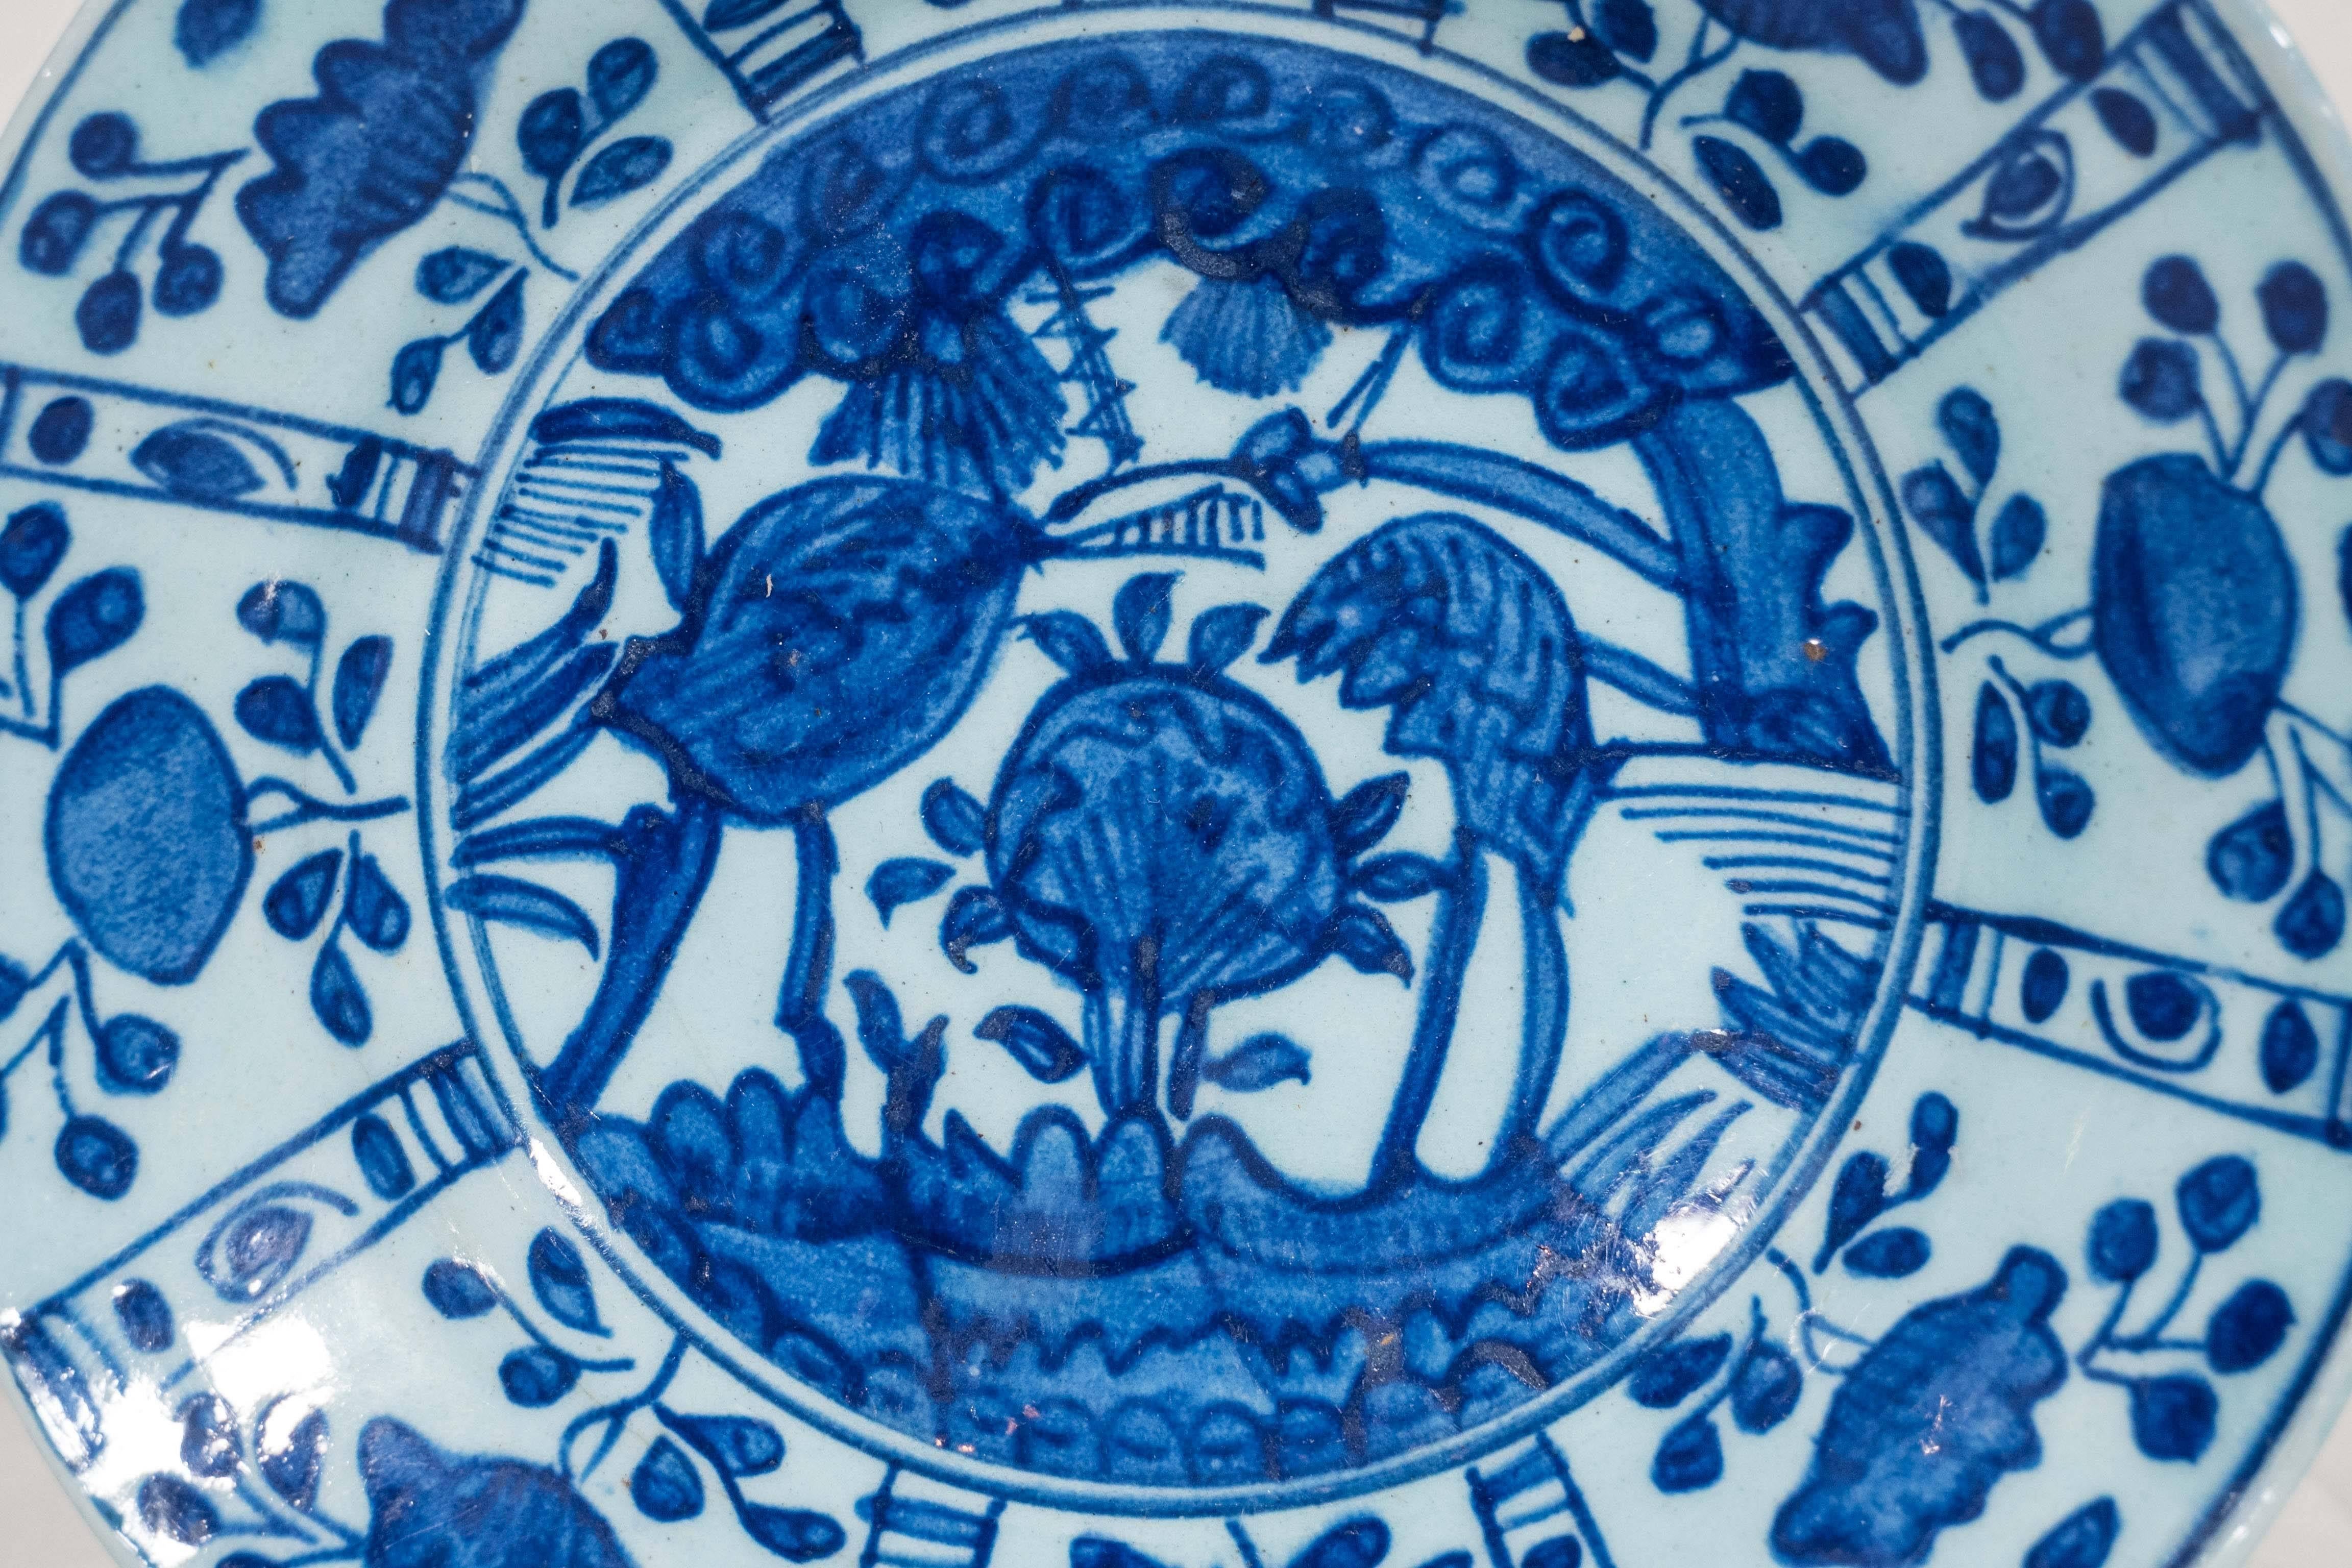 A blue and white Kütahya pottery dish with decoration inspired by Chinese 17th century design. Kütahya pottery began in the 16th century. From early on the forms were naive and free flowing rather than formal. 
Made during the Ottoman Empire, in